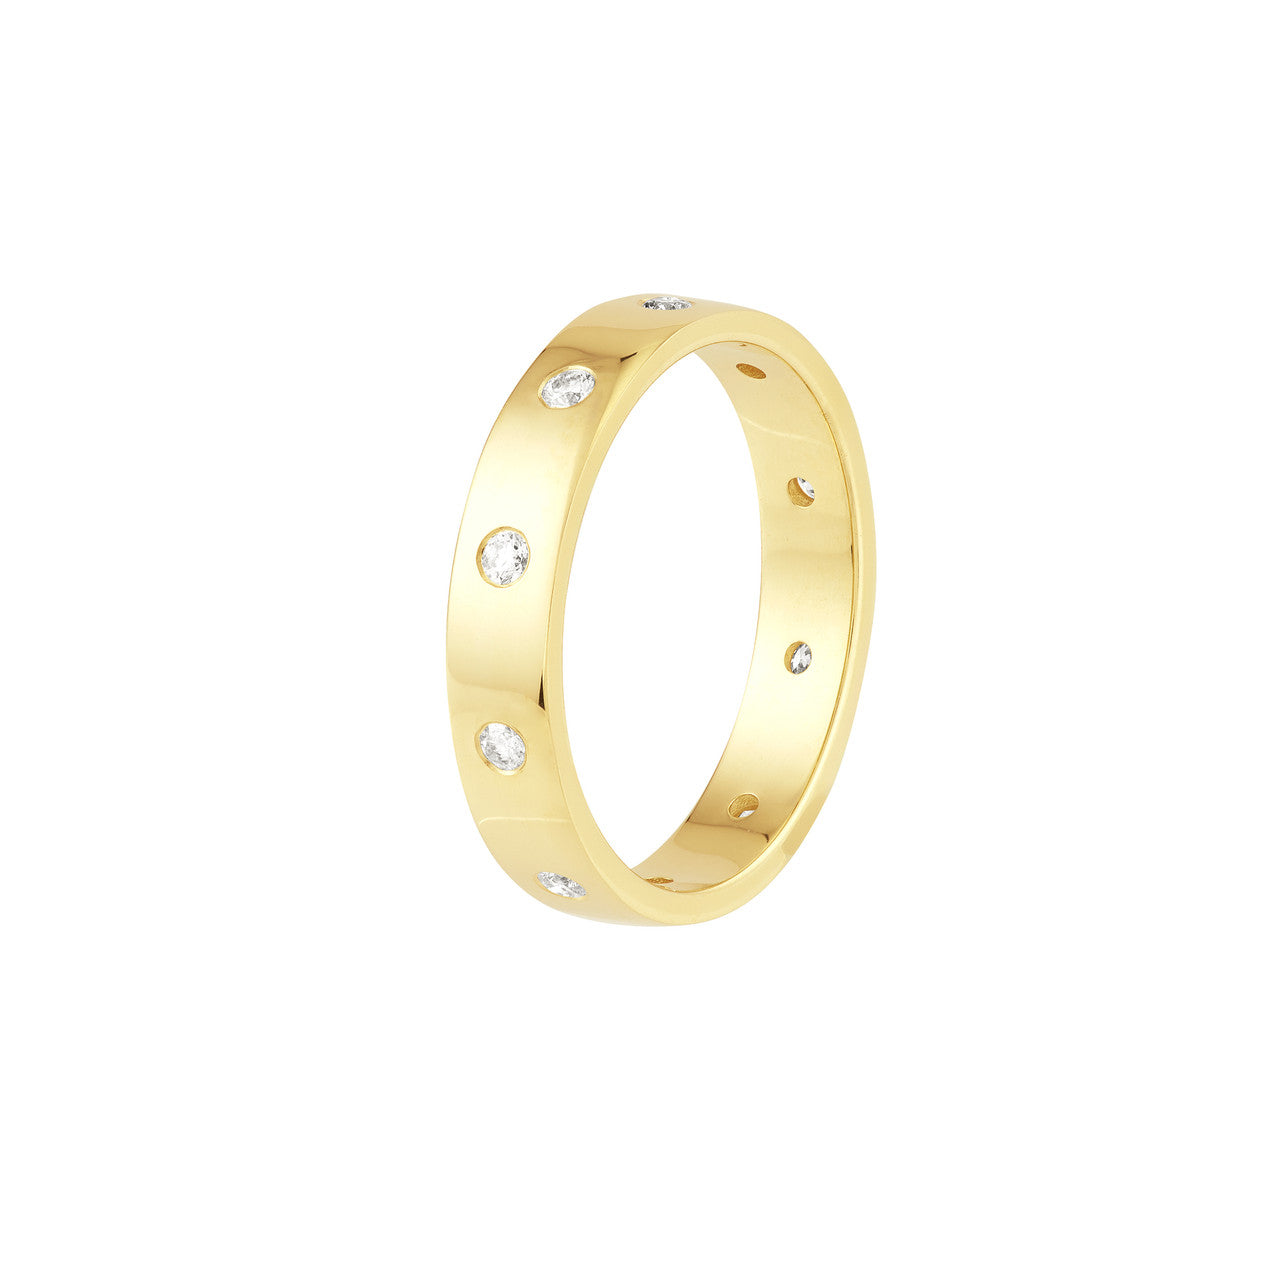 A gold ring with diamonds on it